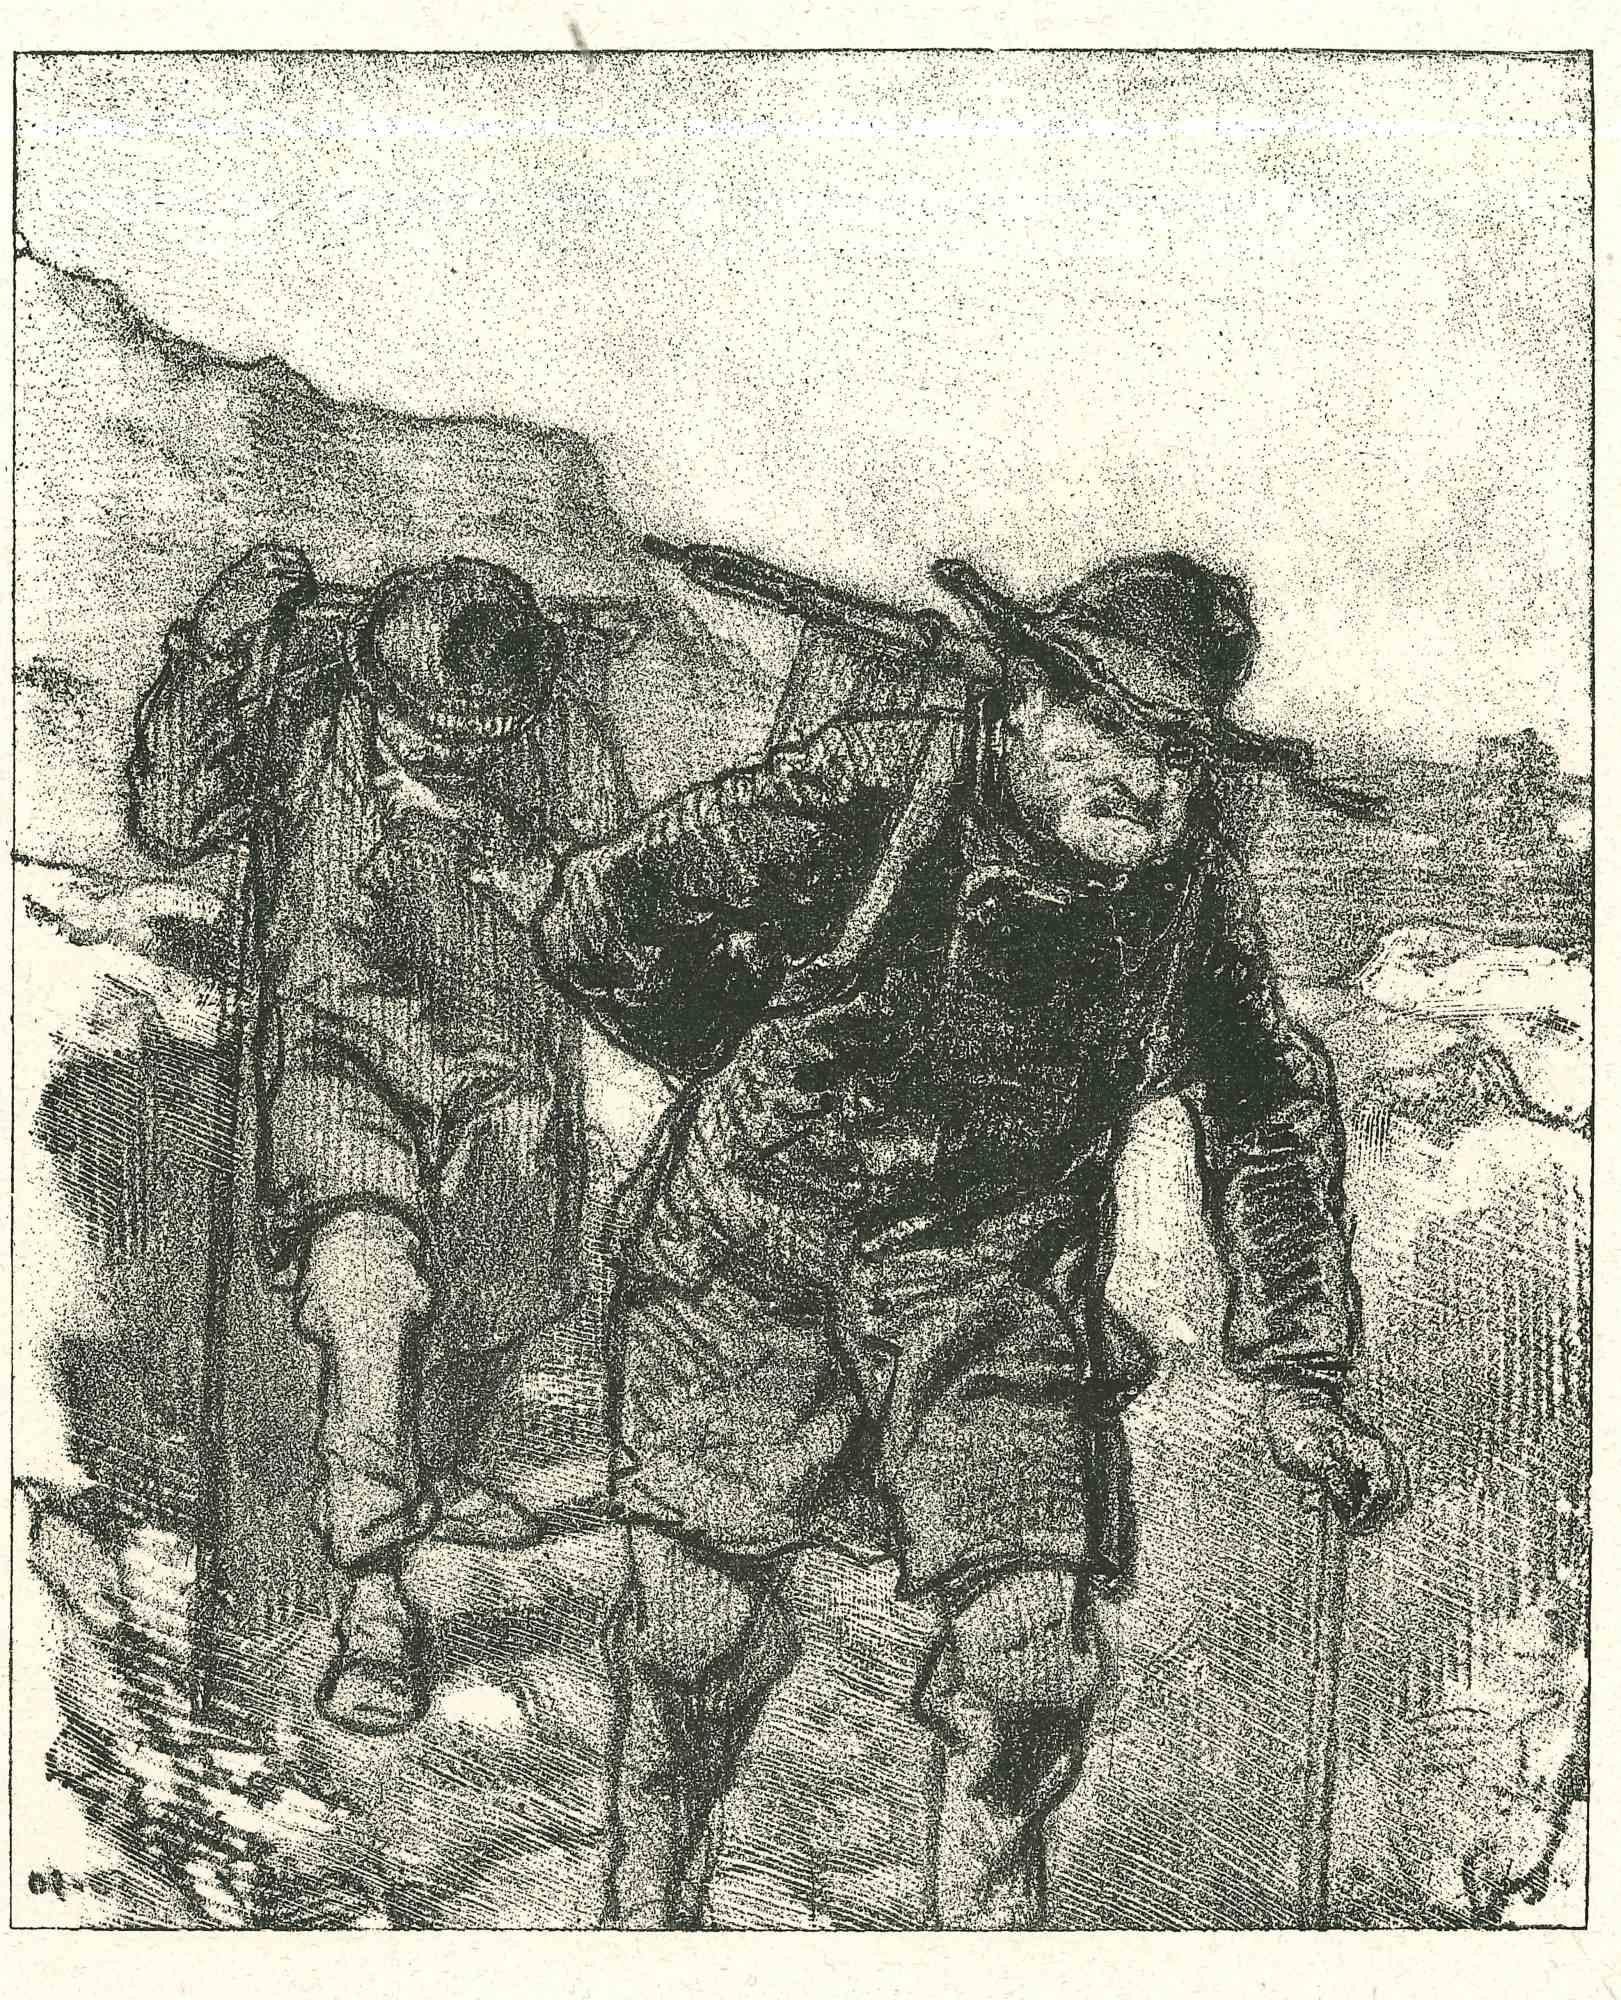 Mountaineers is an original lithograph artwork on ivory-colored paper, realized by the French draftsman Paul Gavarni (after) (alias Guillaume Sulpice Chevalier Gavarni, 1804-1866) in Paris, 1881, in the collection of Illustrations for "La Mascarade